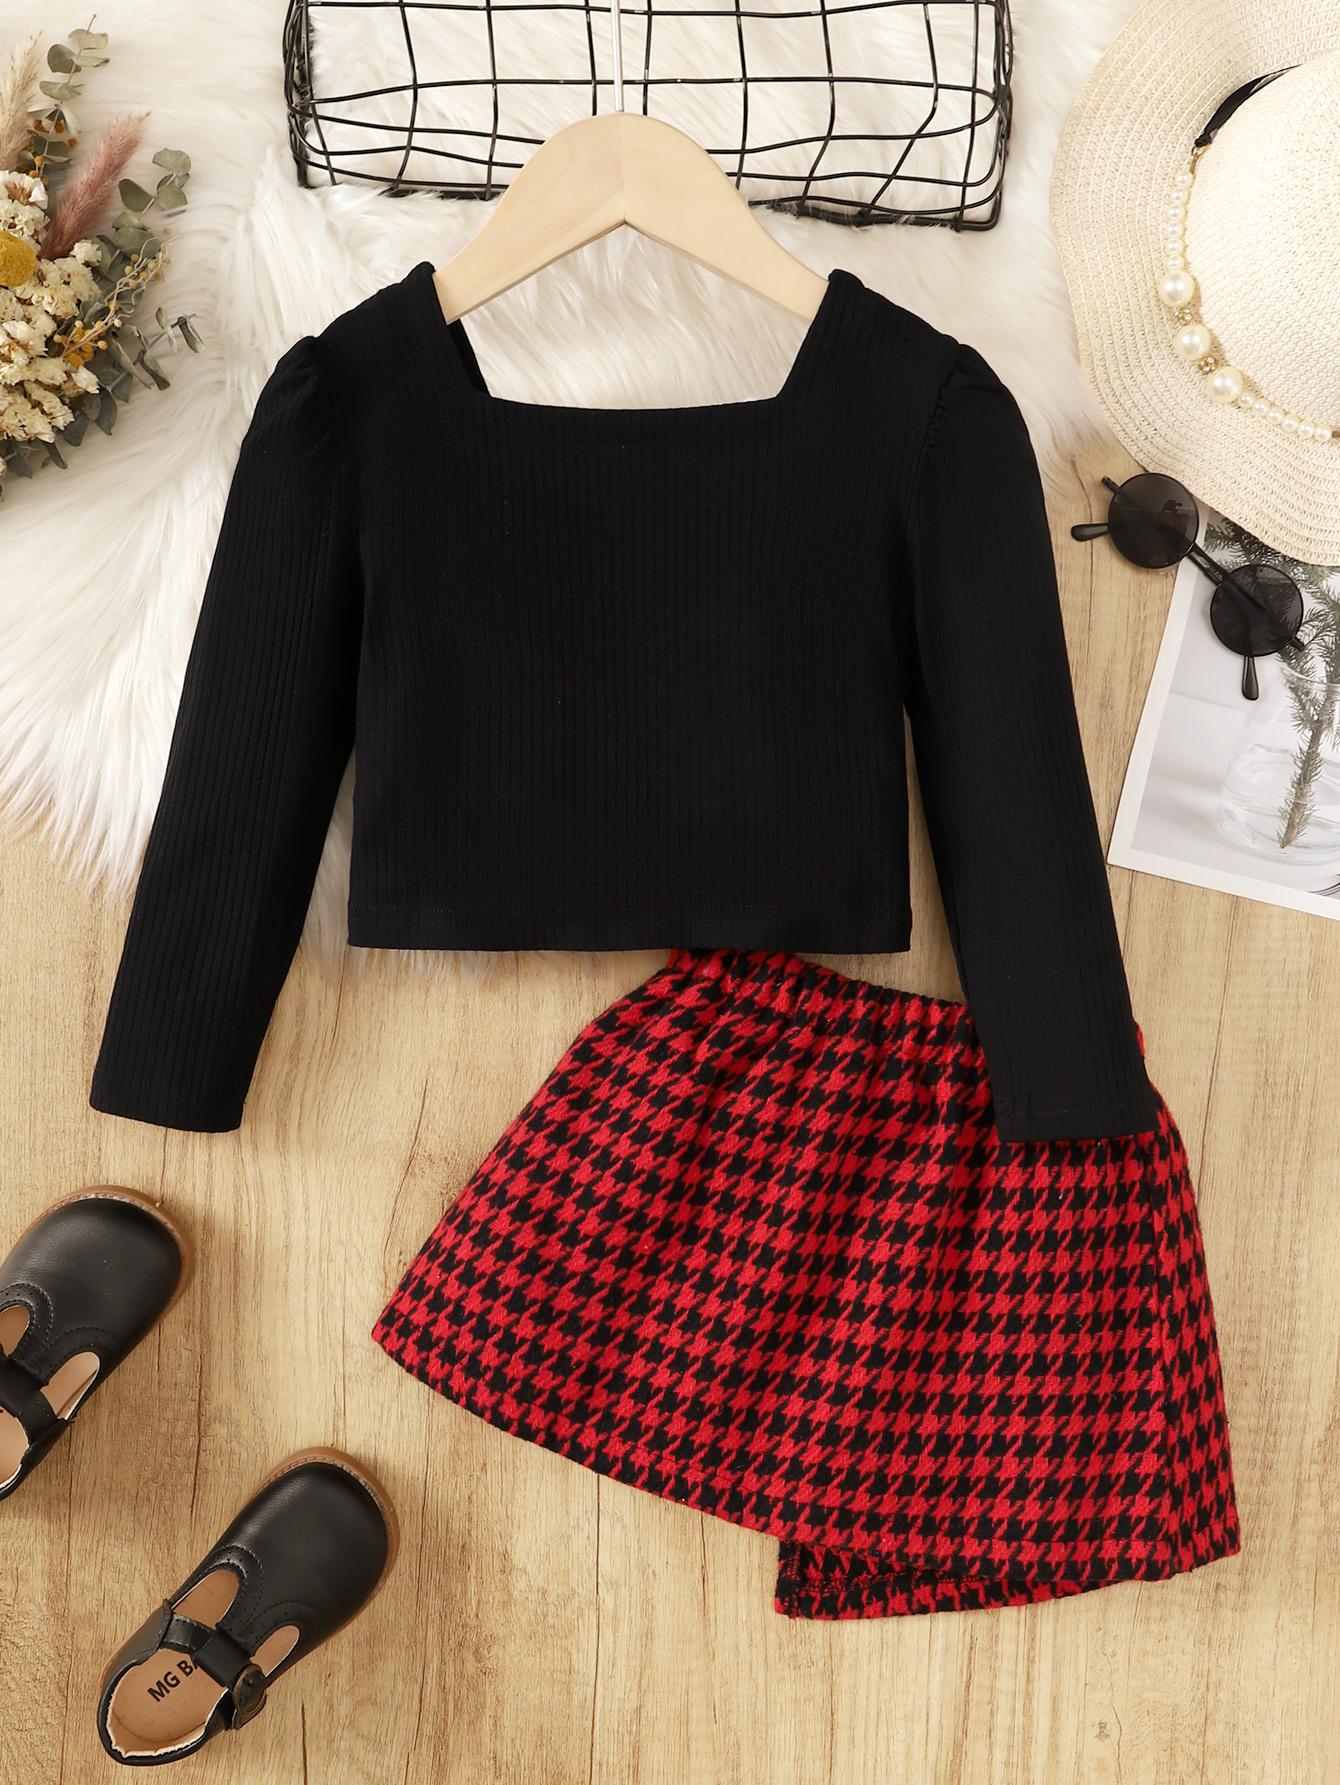 2-7Y Ready Stock Kids Girls Skirts Sets Knitted Long Sleeve Pure Color Tops Asymmetrical Houndstooth Skirts Spring Autumn 2Pcs Clothing From 2Y-7Y Black Catpapa  462308161